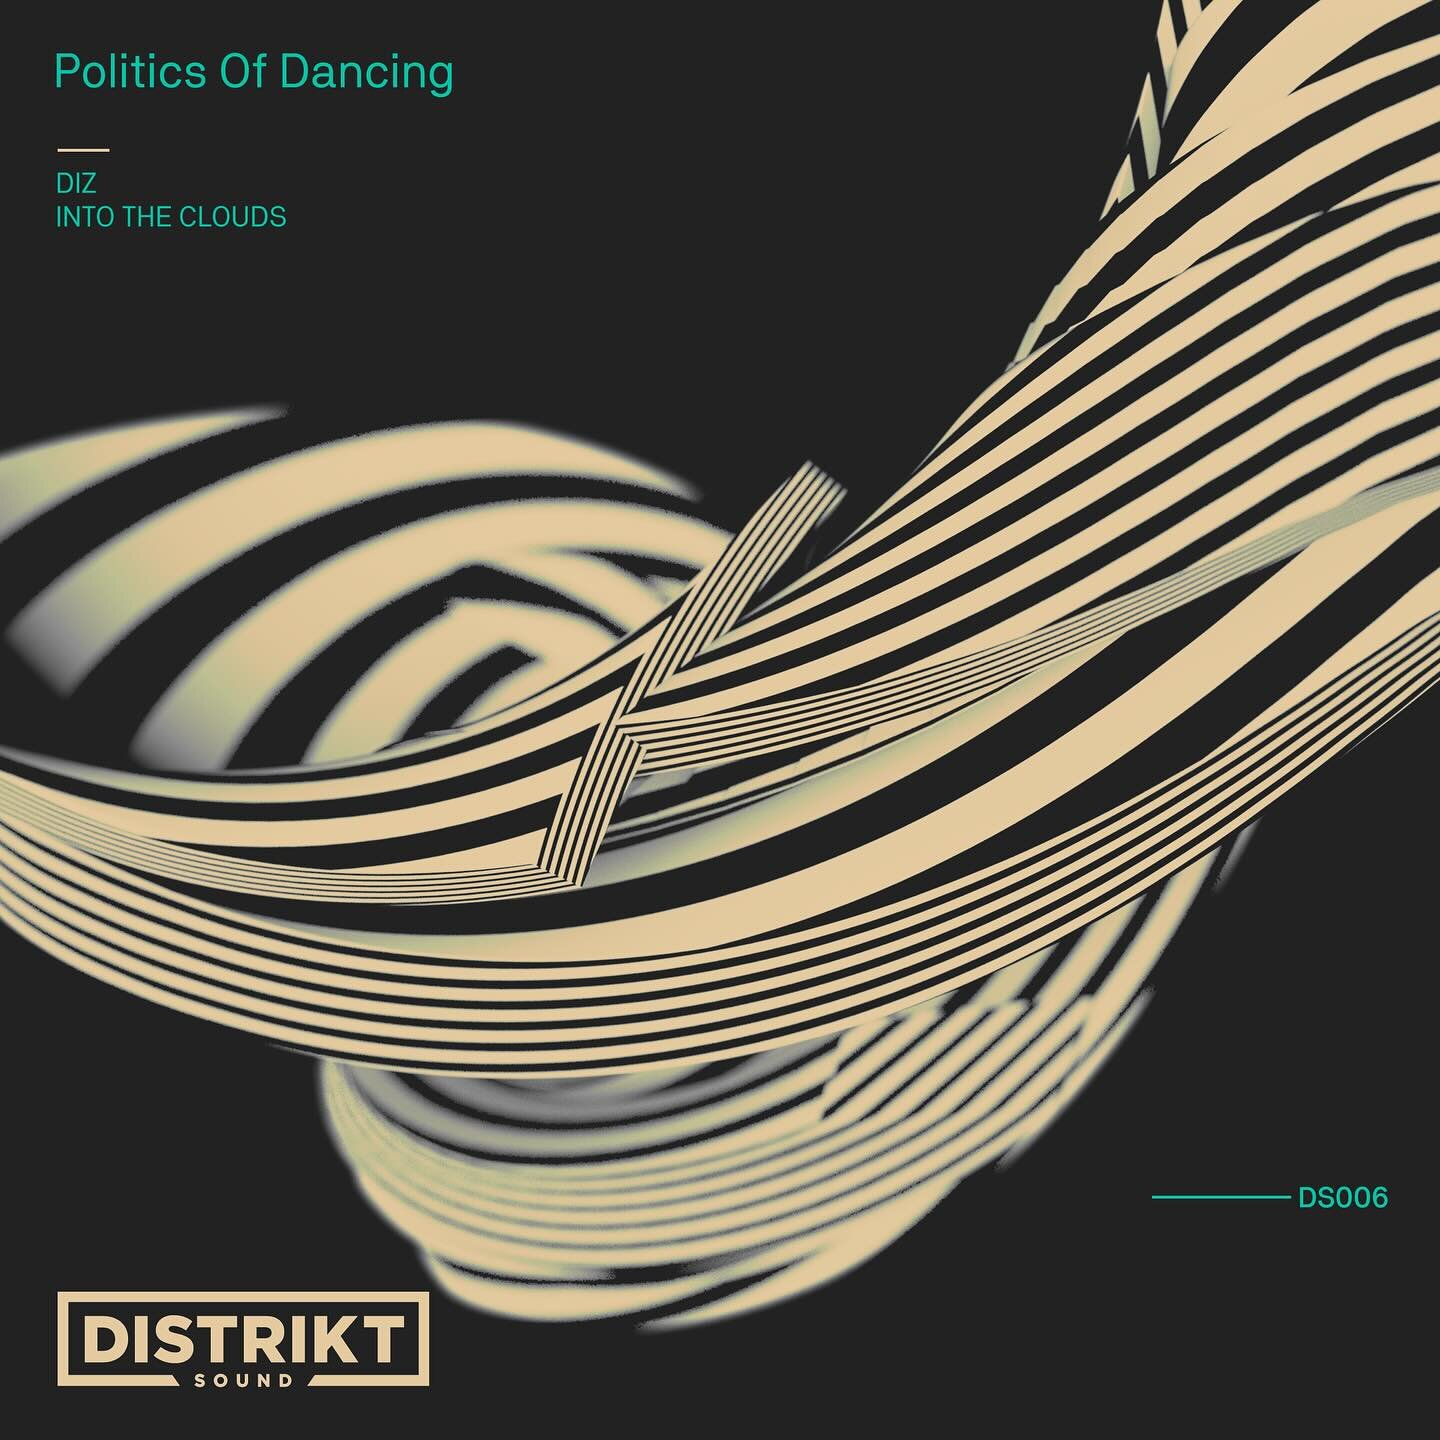 OUT NOW - LINK IN BIO

Artist: @politics_of_dancing 
Title: DIZ EP
Record Label: @distriktsound 
Cat.Number: DS006
Release Date: 15th December 2023

Tracklist:
1) DIZ
2) INTO THE CLOUDS

1. DIZ
The second song featured on the Politics of Dancing, div